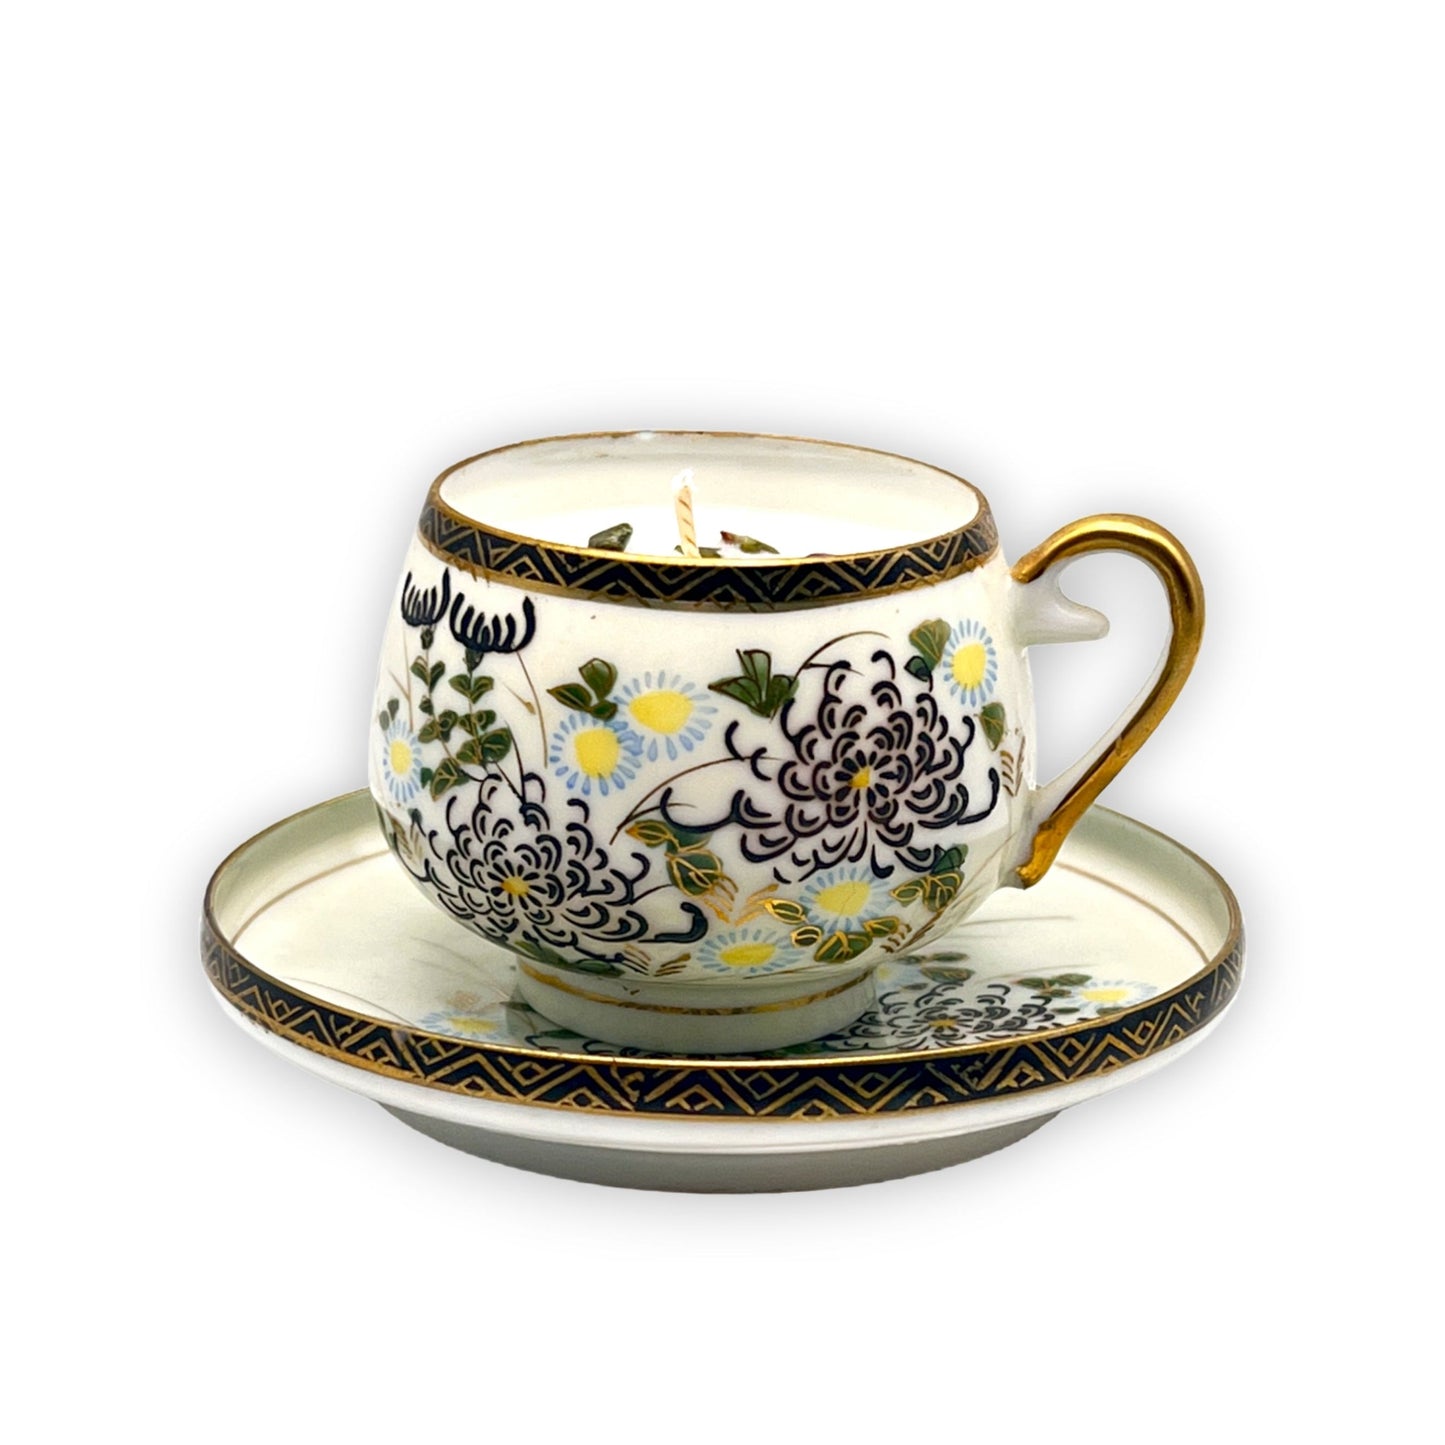 Japanese Kutani Bunponese Vintage Teacup Candle | Bridal Shower | Tea Party | Floral Candles | Soy Wax